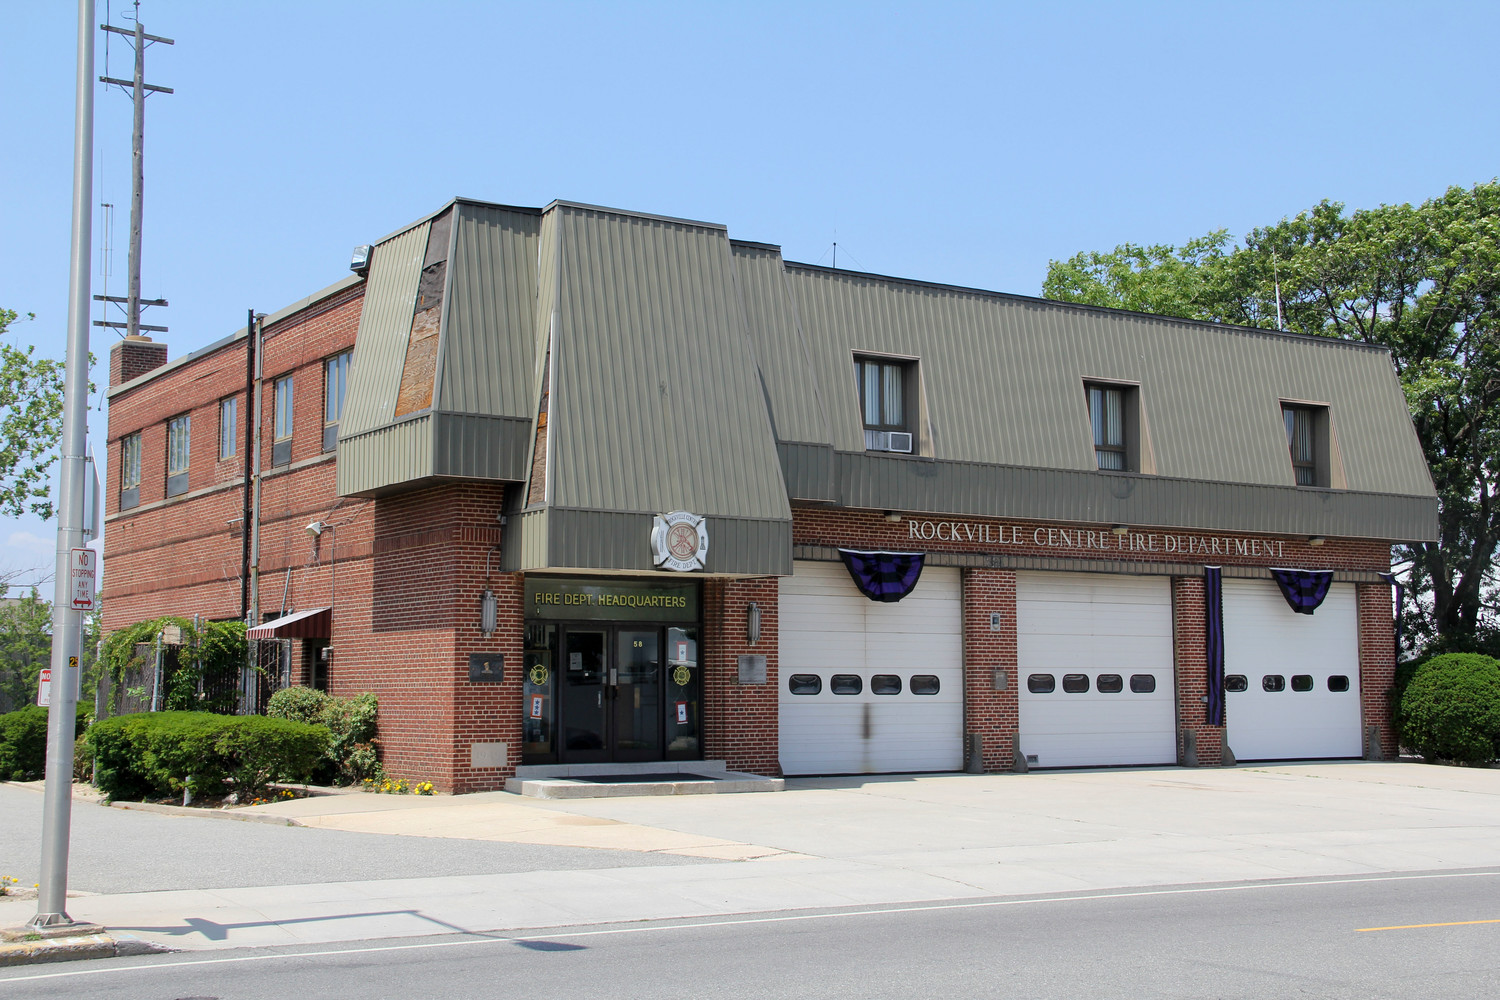 Though Floodlight Rescue Company No. 1 is an independent company, it operates out of the Rockville Centre Fire Department’s headquarters on North Centre Avenue.